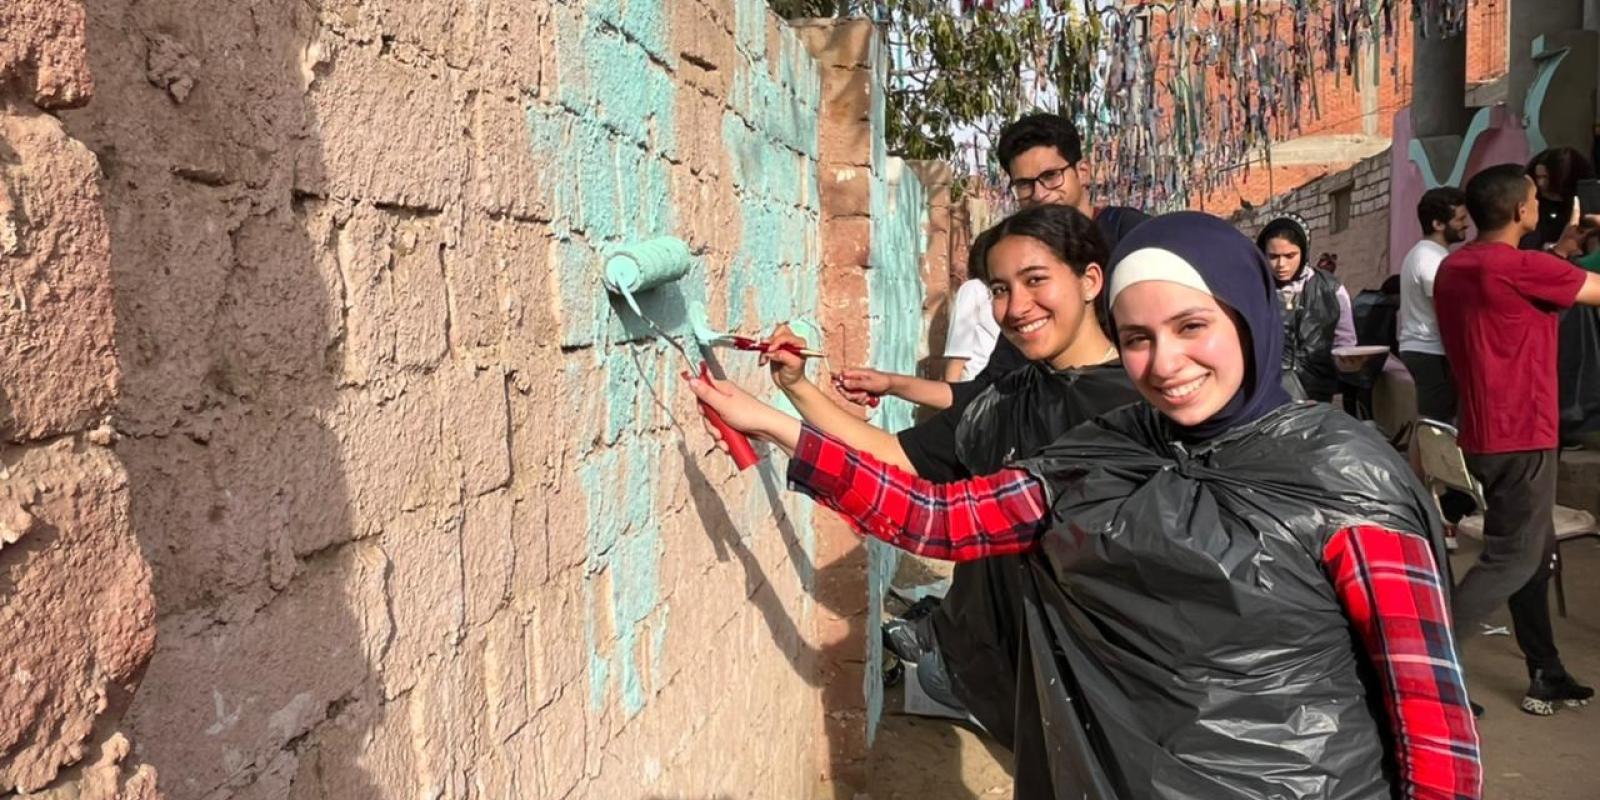 AUC student volunteers paint walls near a home in Fayoum